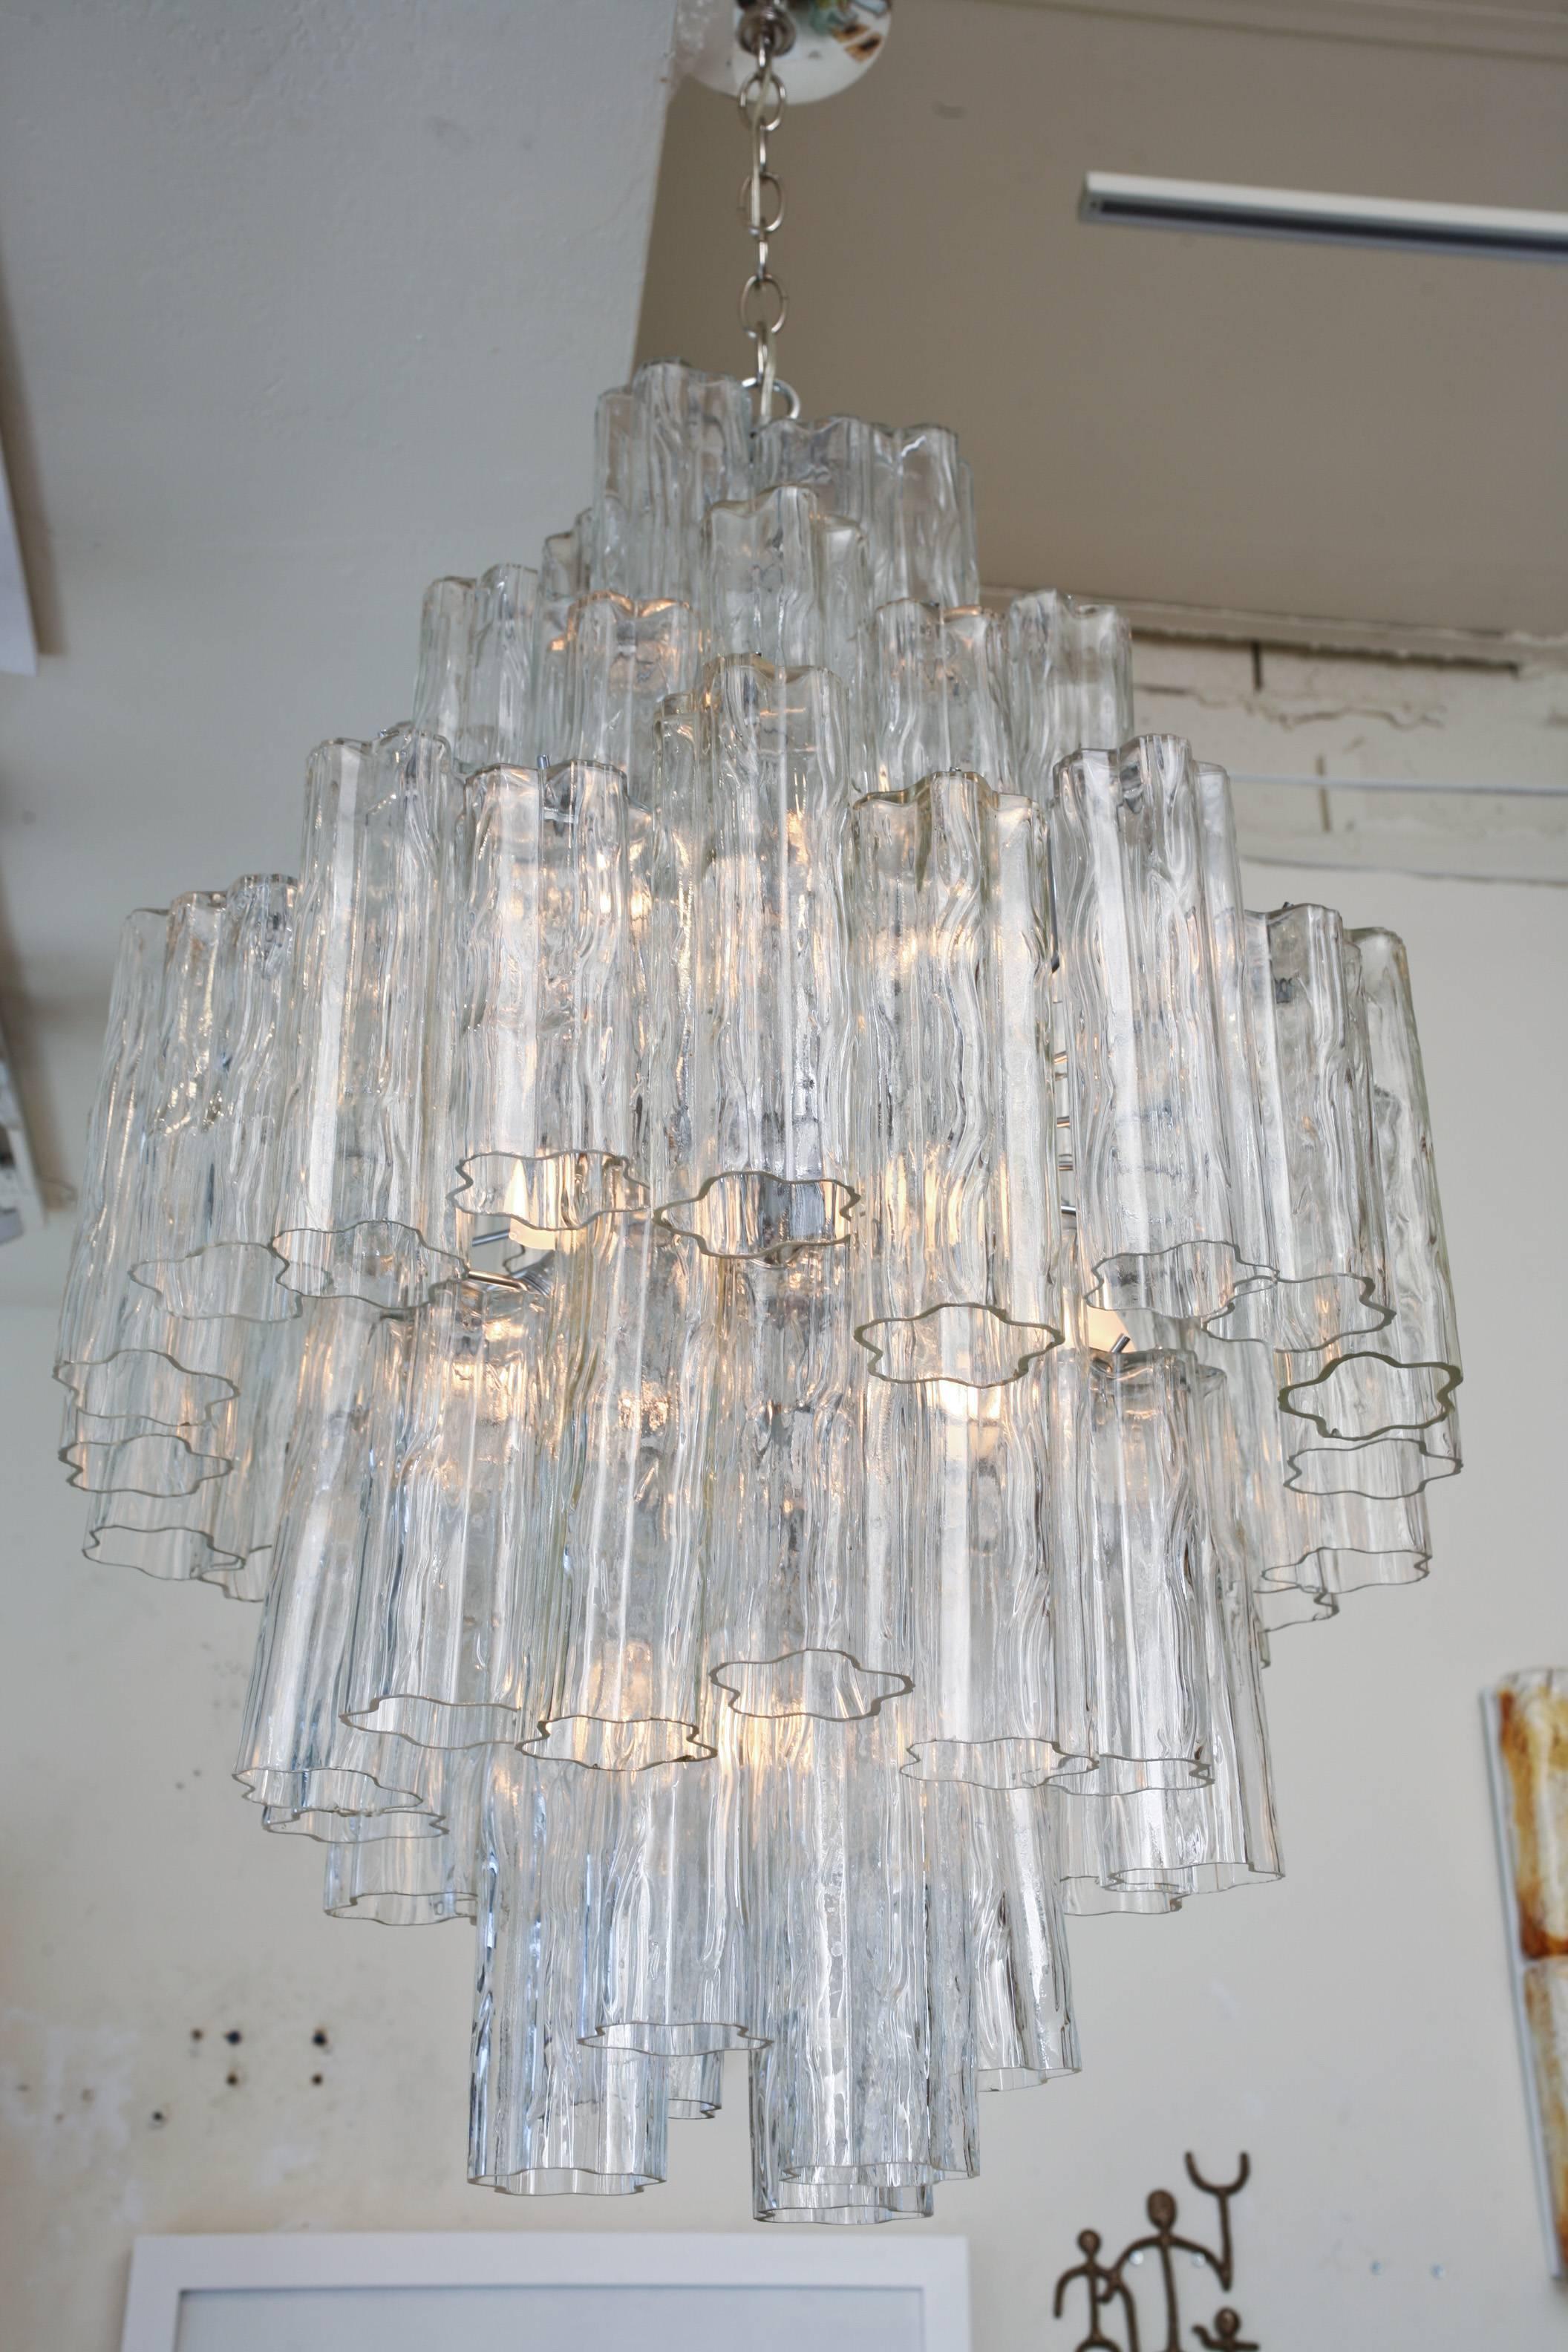 This gorgeous and substantial Venini Murano vintage chandelier has tubular hand blown glass pendants on five tiers. The widest is at the center. There are 56 pieces of textural Murano glass layered. The cage has been re-nickeled silver and rewired.